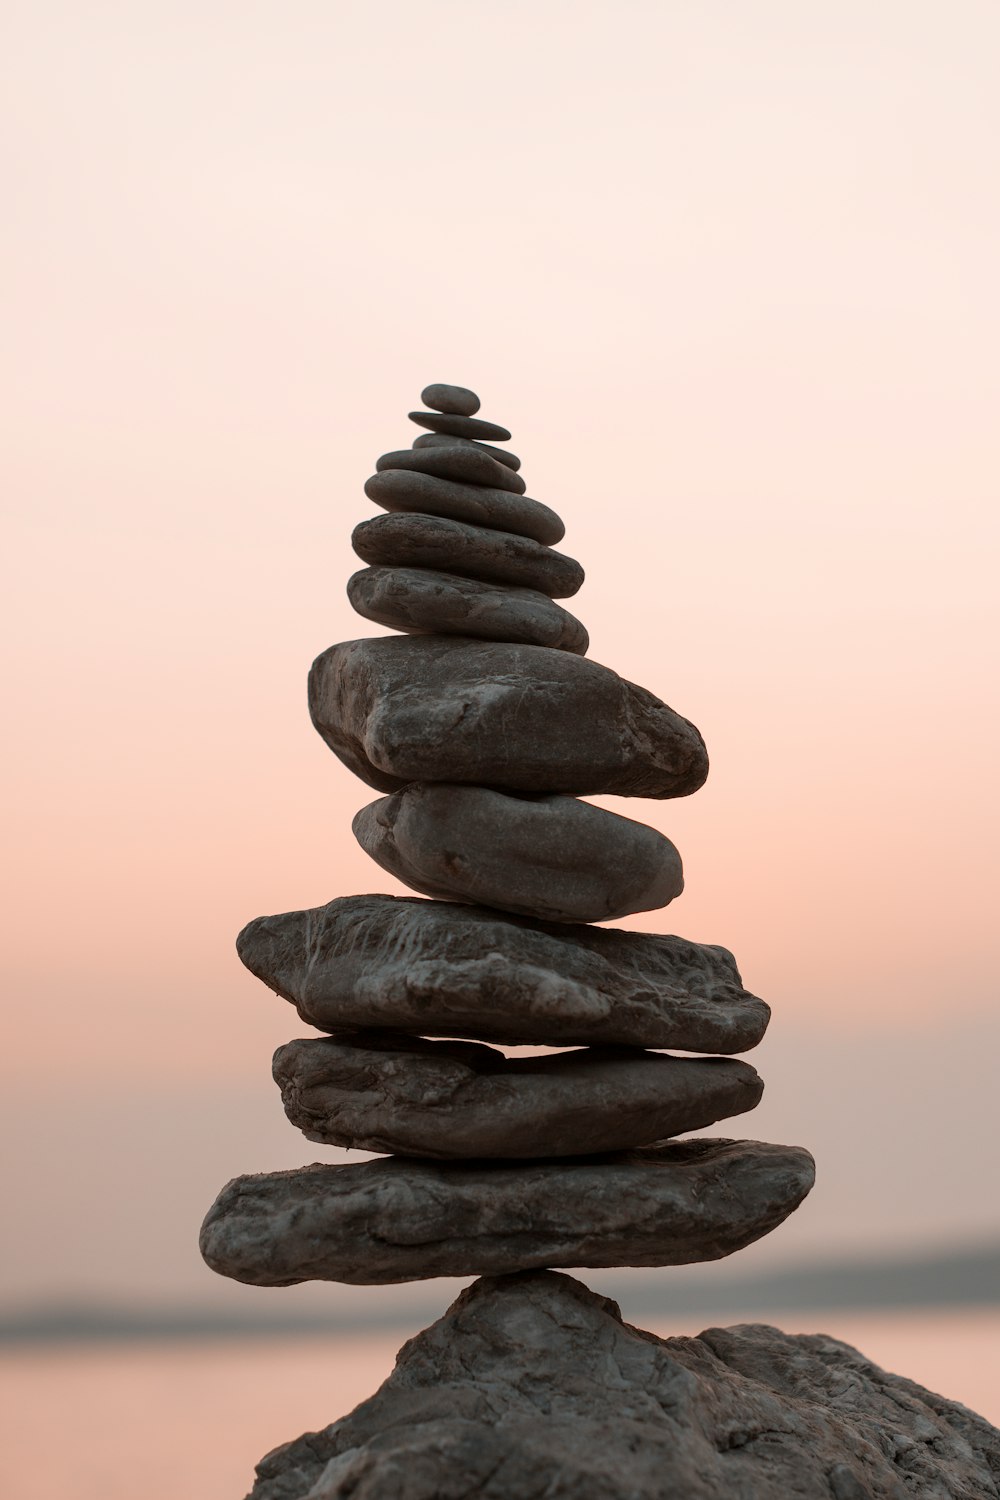 A stack of rocks against a pink sky